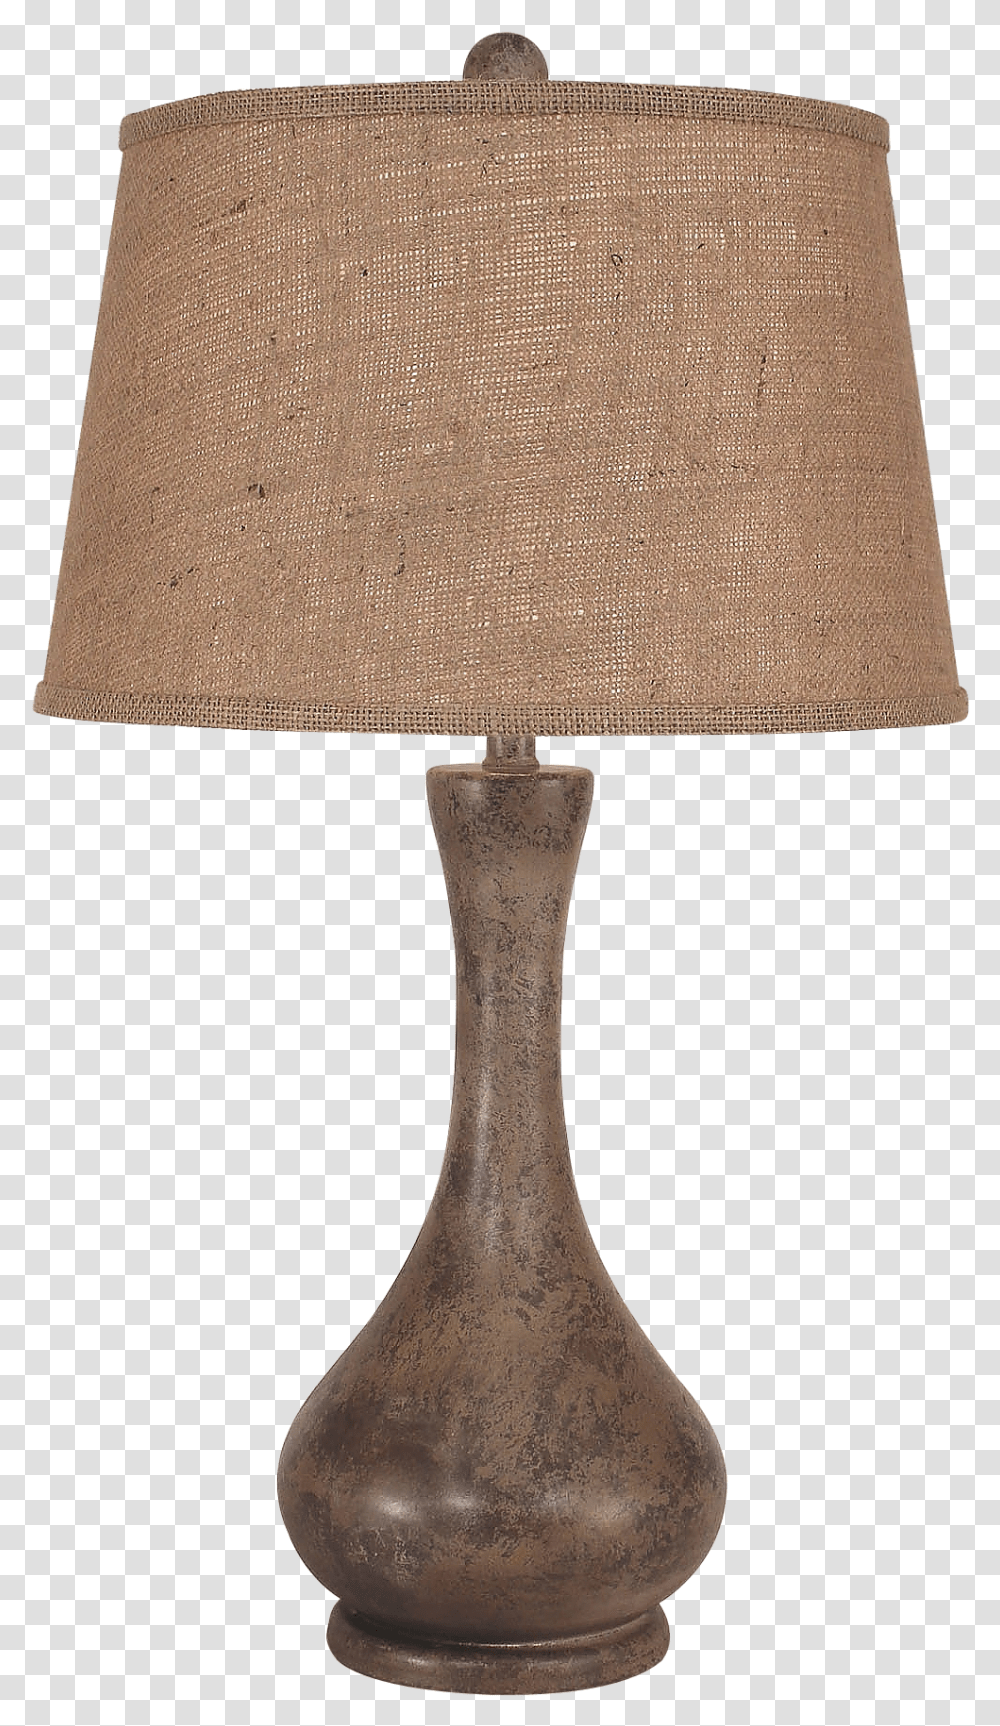 Tarnished Cottage Smooth Genie Bottle Table Lamp Lamp, Lampshade Transparent Png